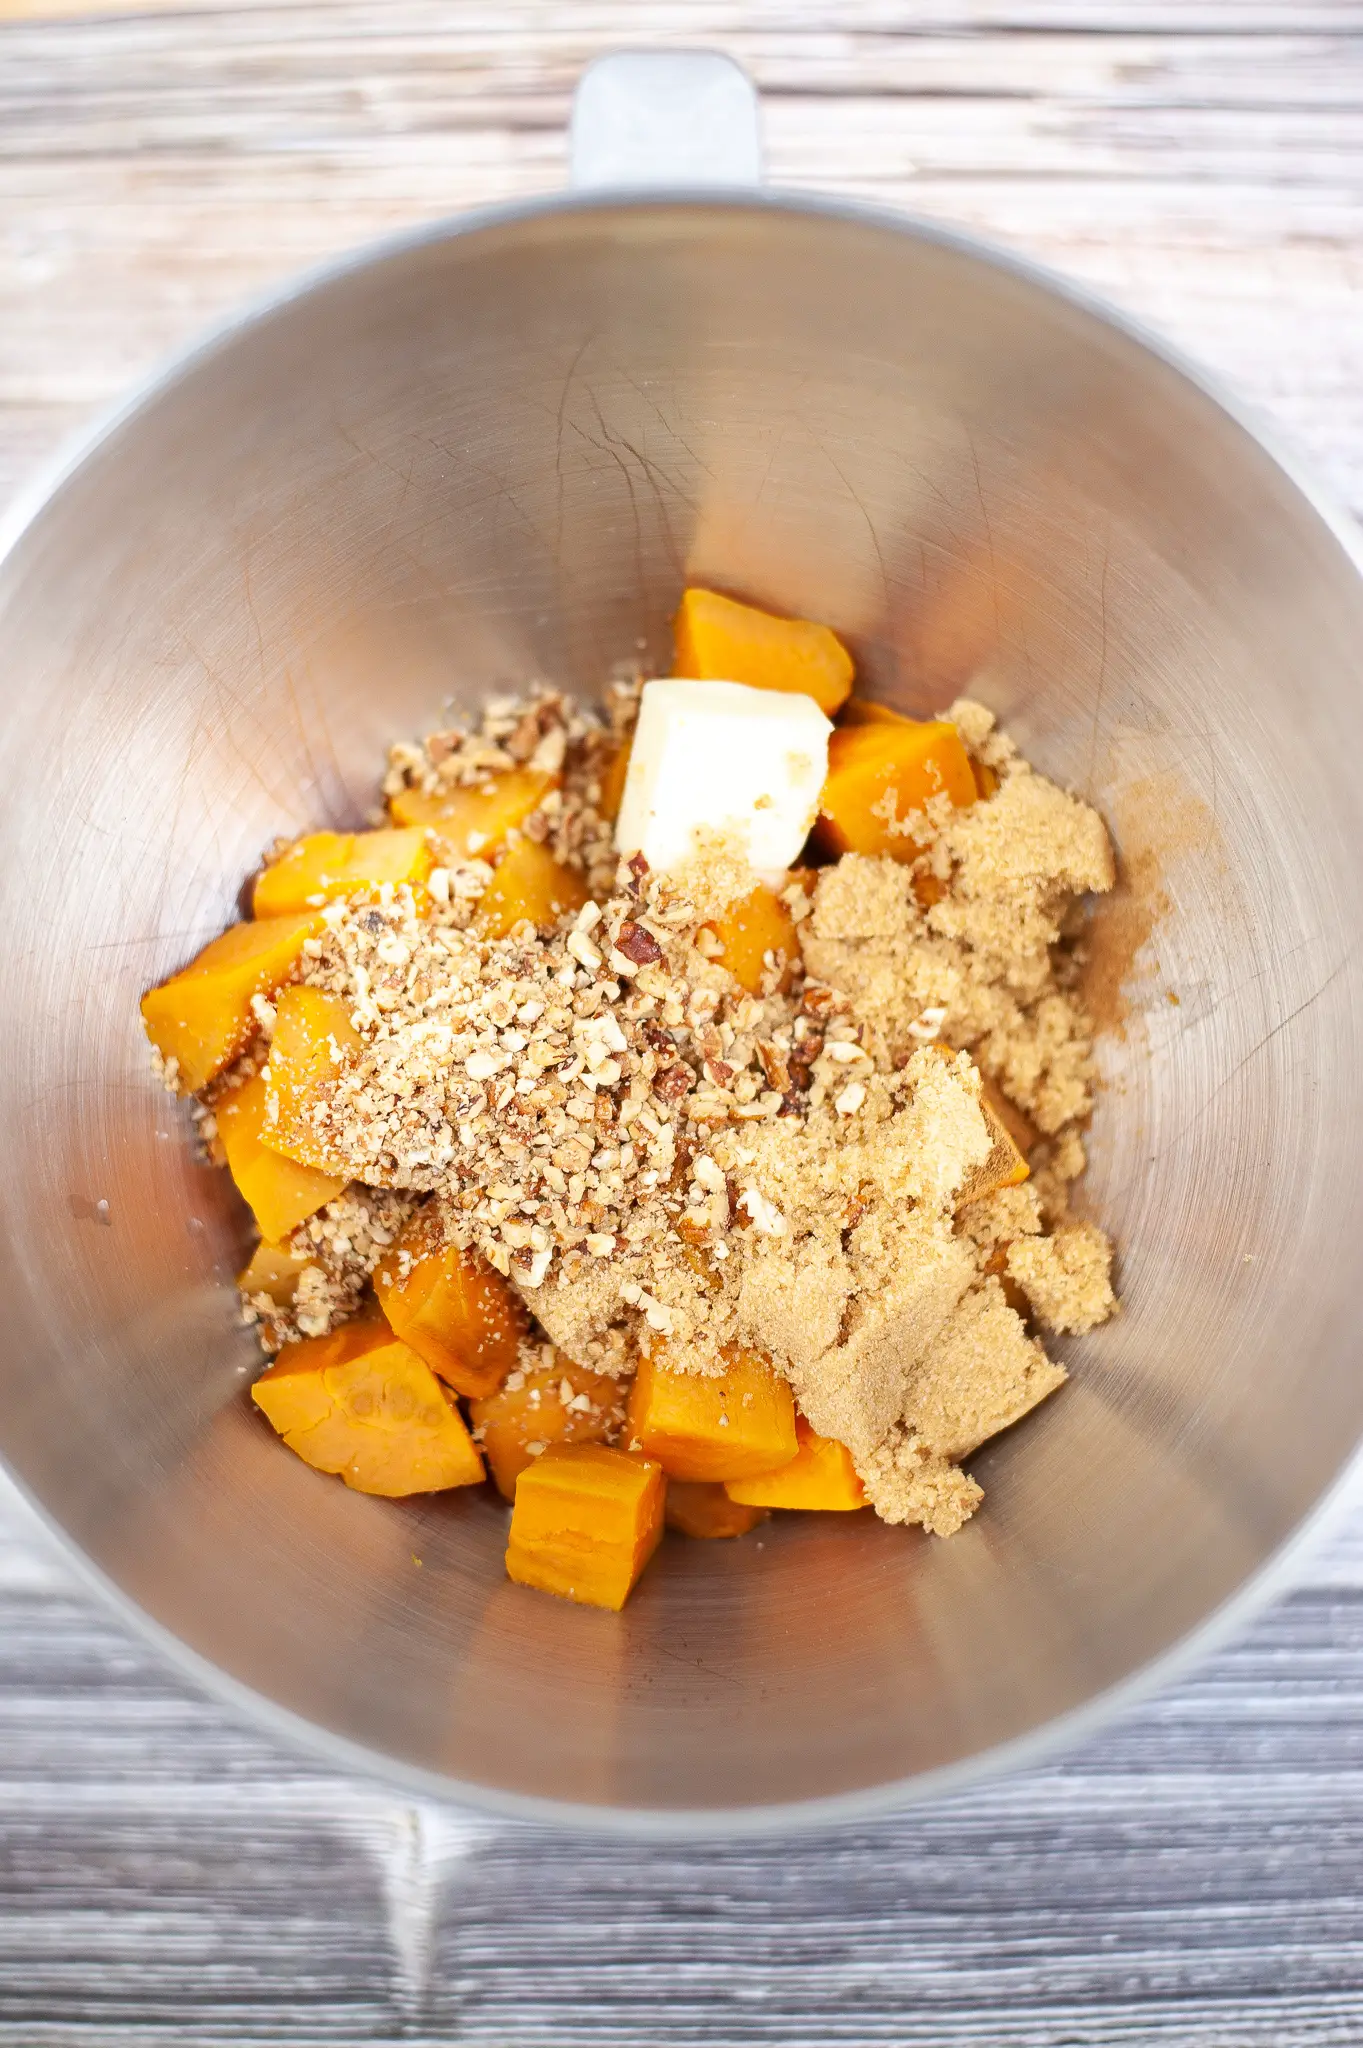 Cooked sweet potatoes, and other ingredients in a bowl.